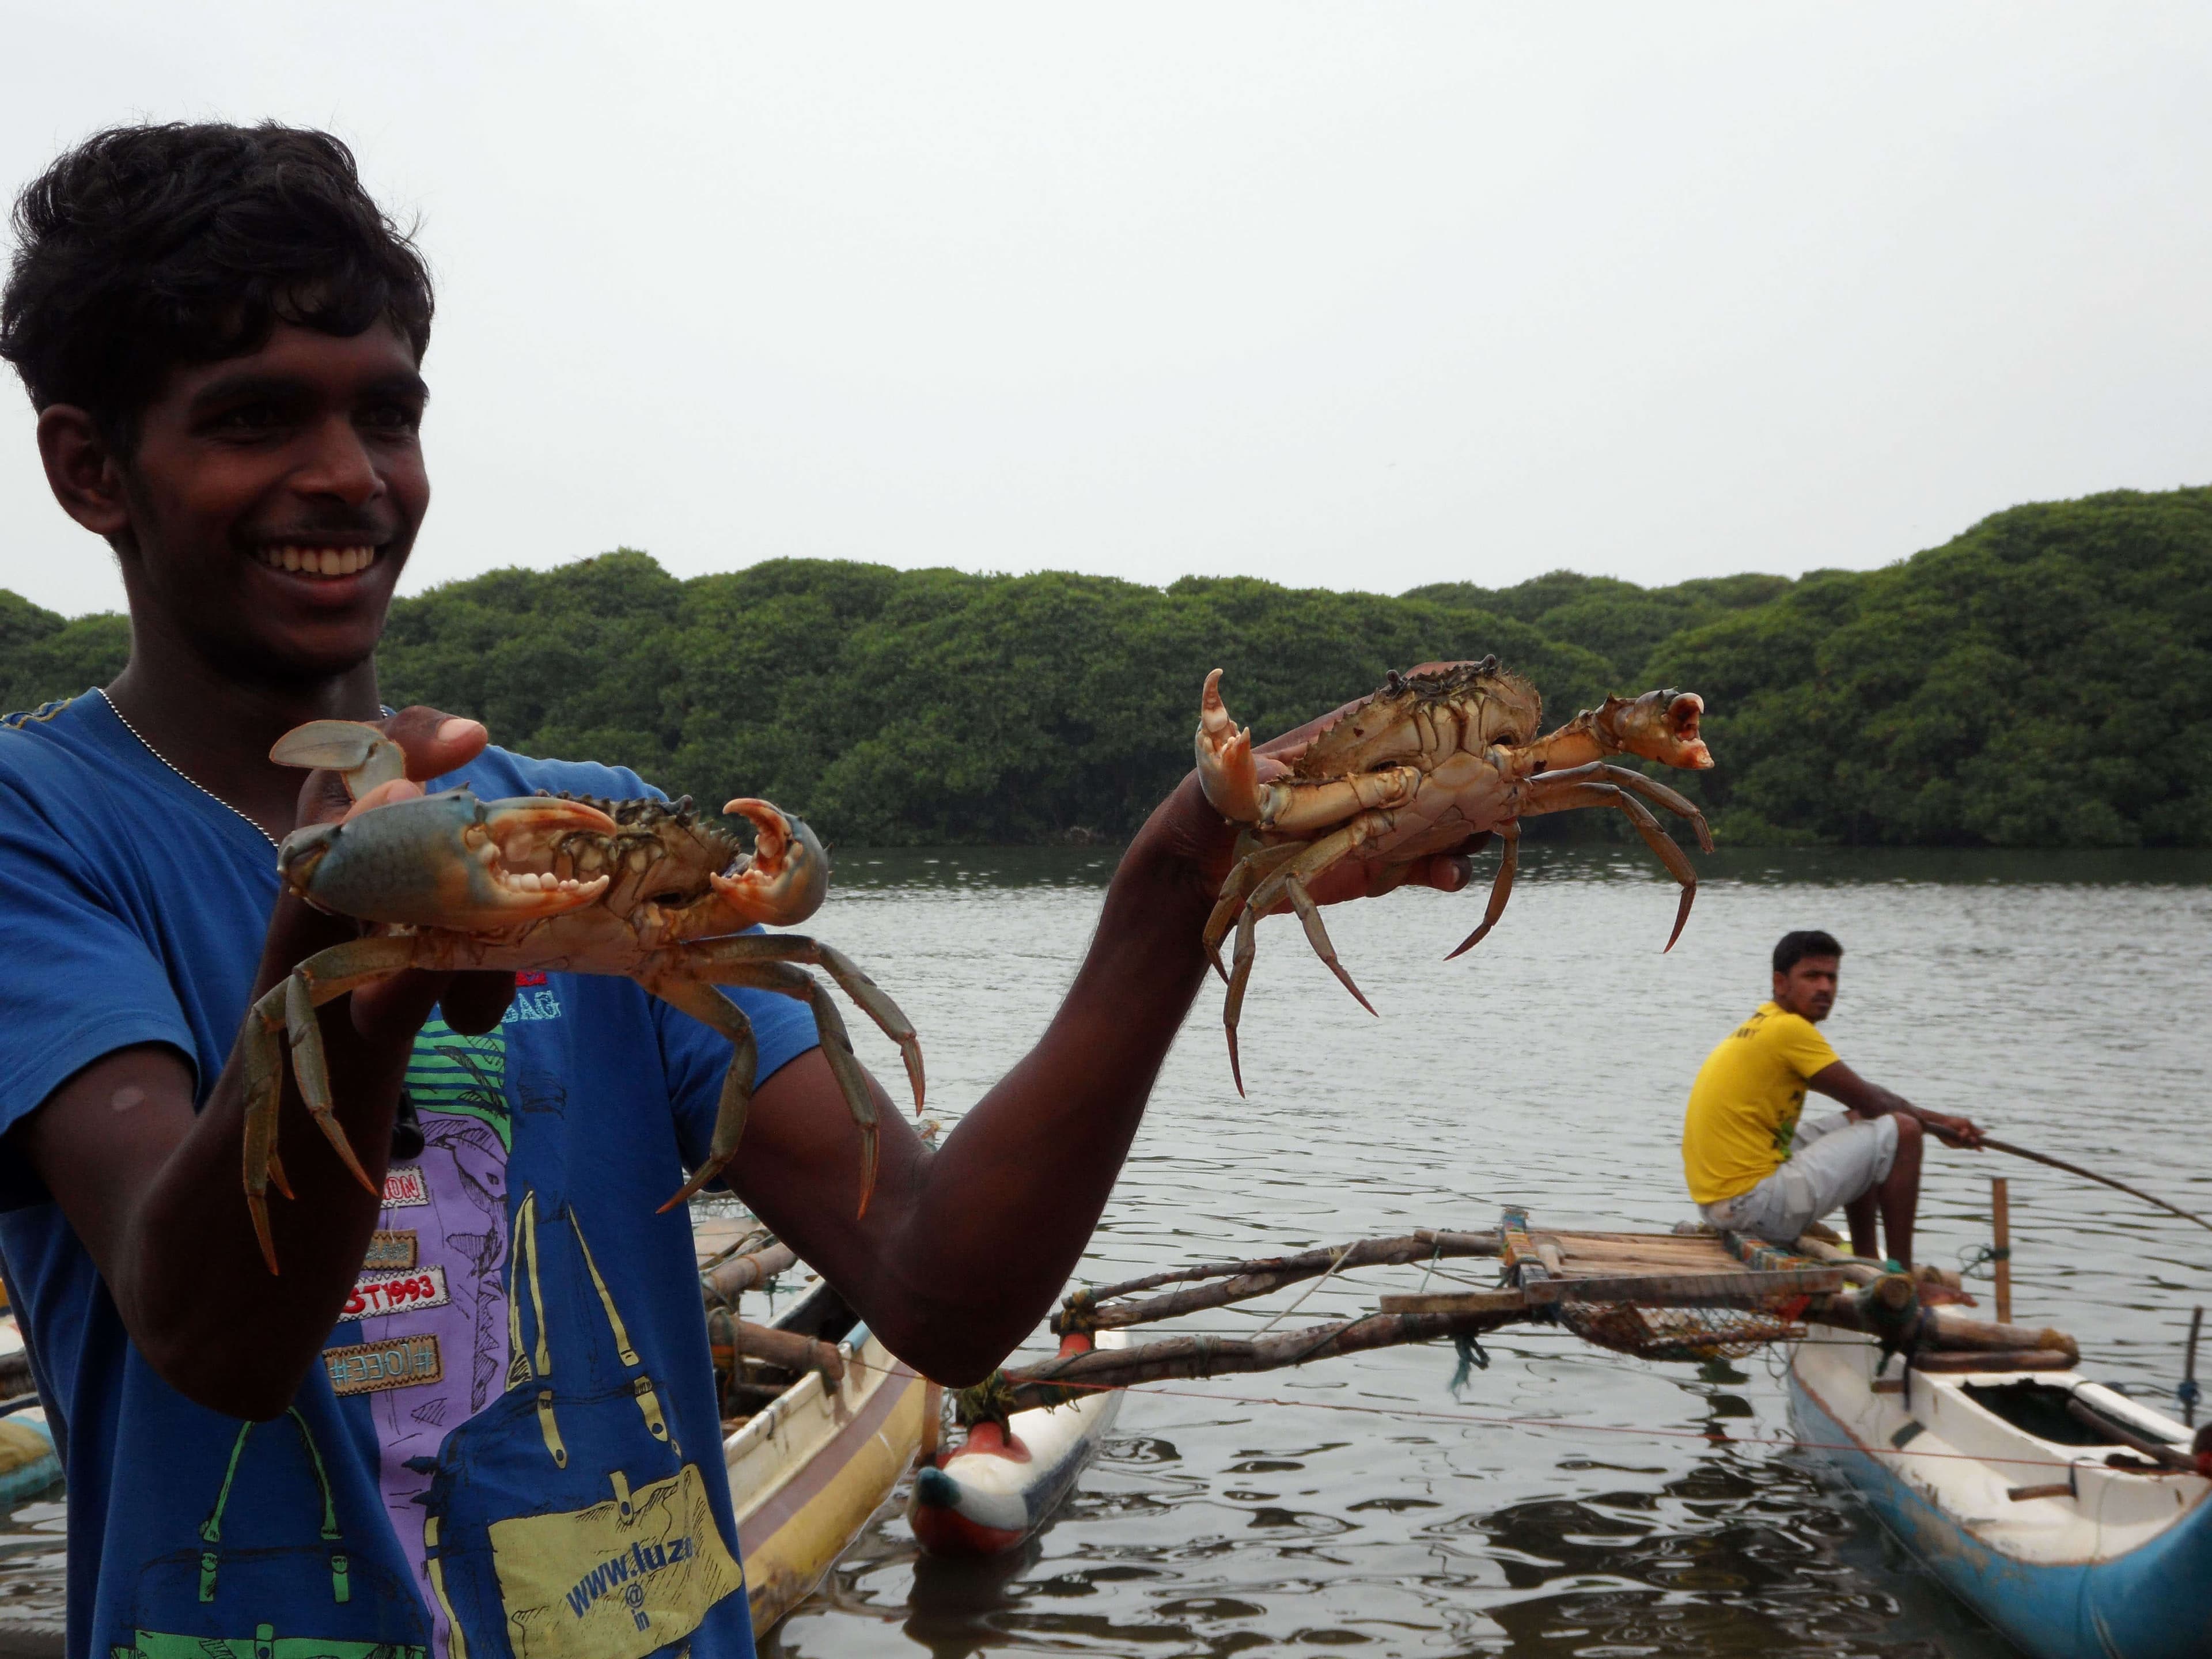 A scene of catching crabs in Negombo river which have spreaded diversity   